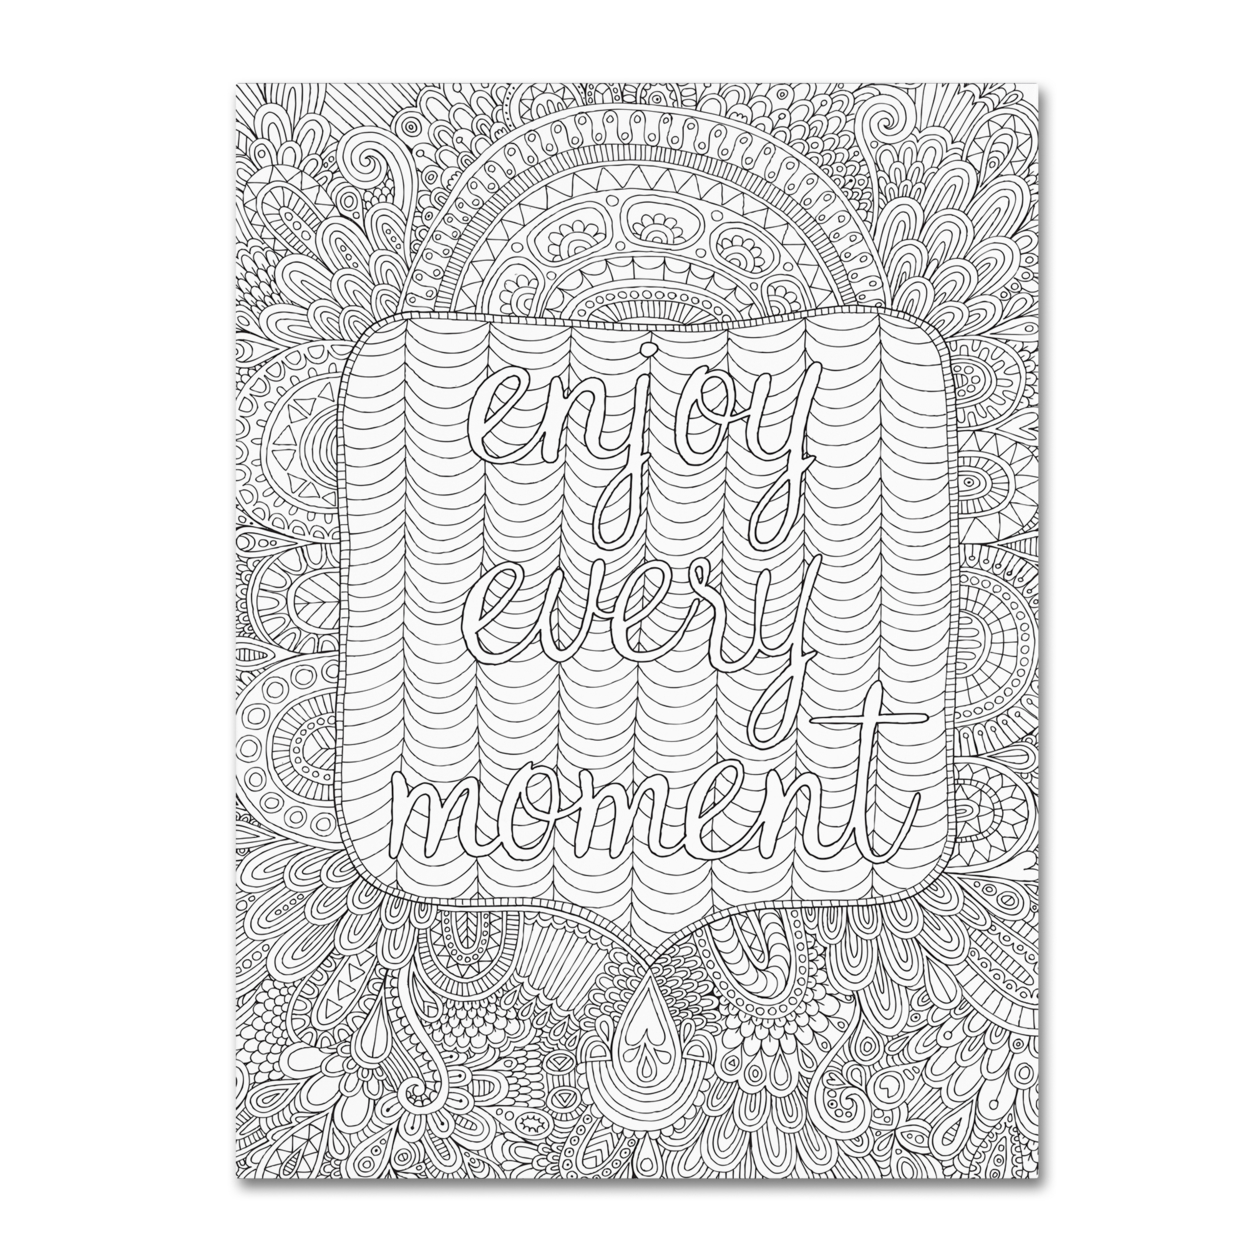 Hello Angel 'Enjoy Every Moment' Canvas Wall Art 35 X 47 Inches